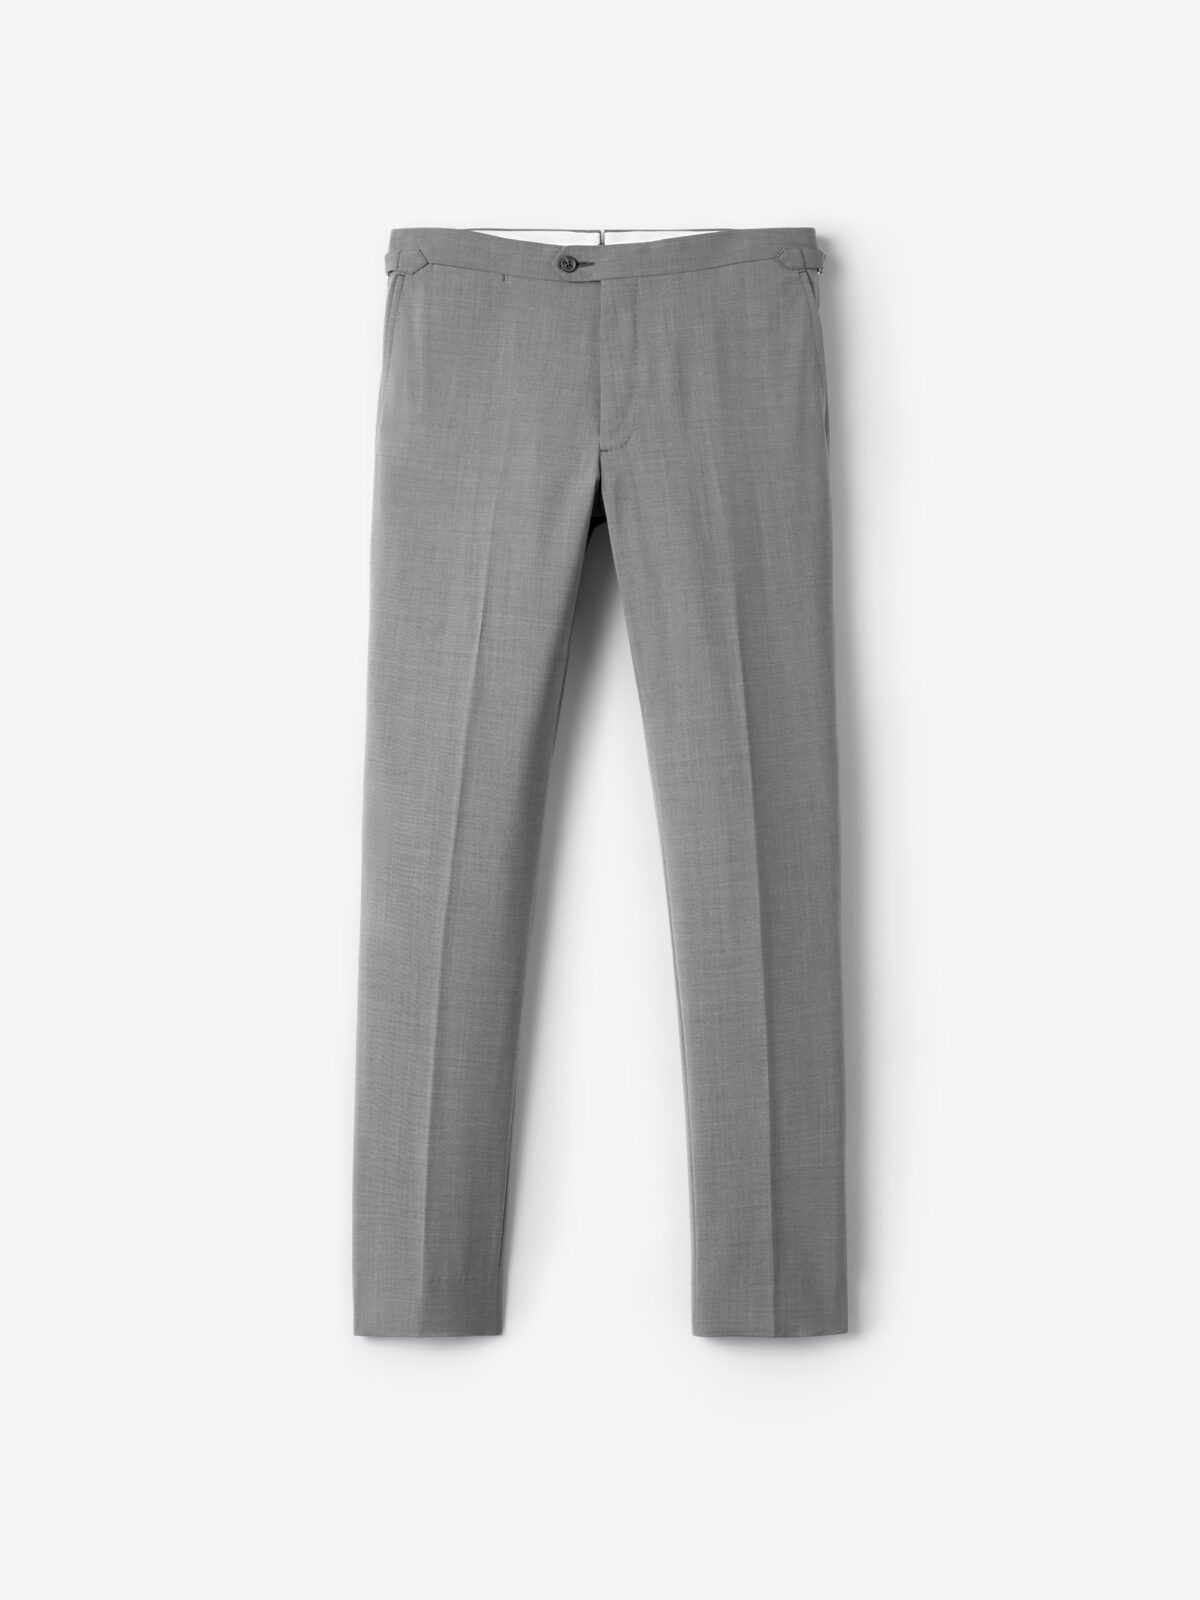 MENS SUMMER SUPERIOR FLECK TROUSERS/PANTS light weight 32 upto 50